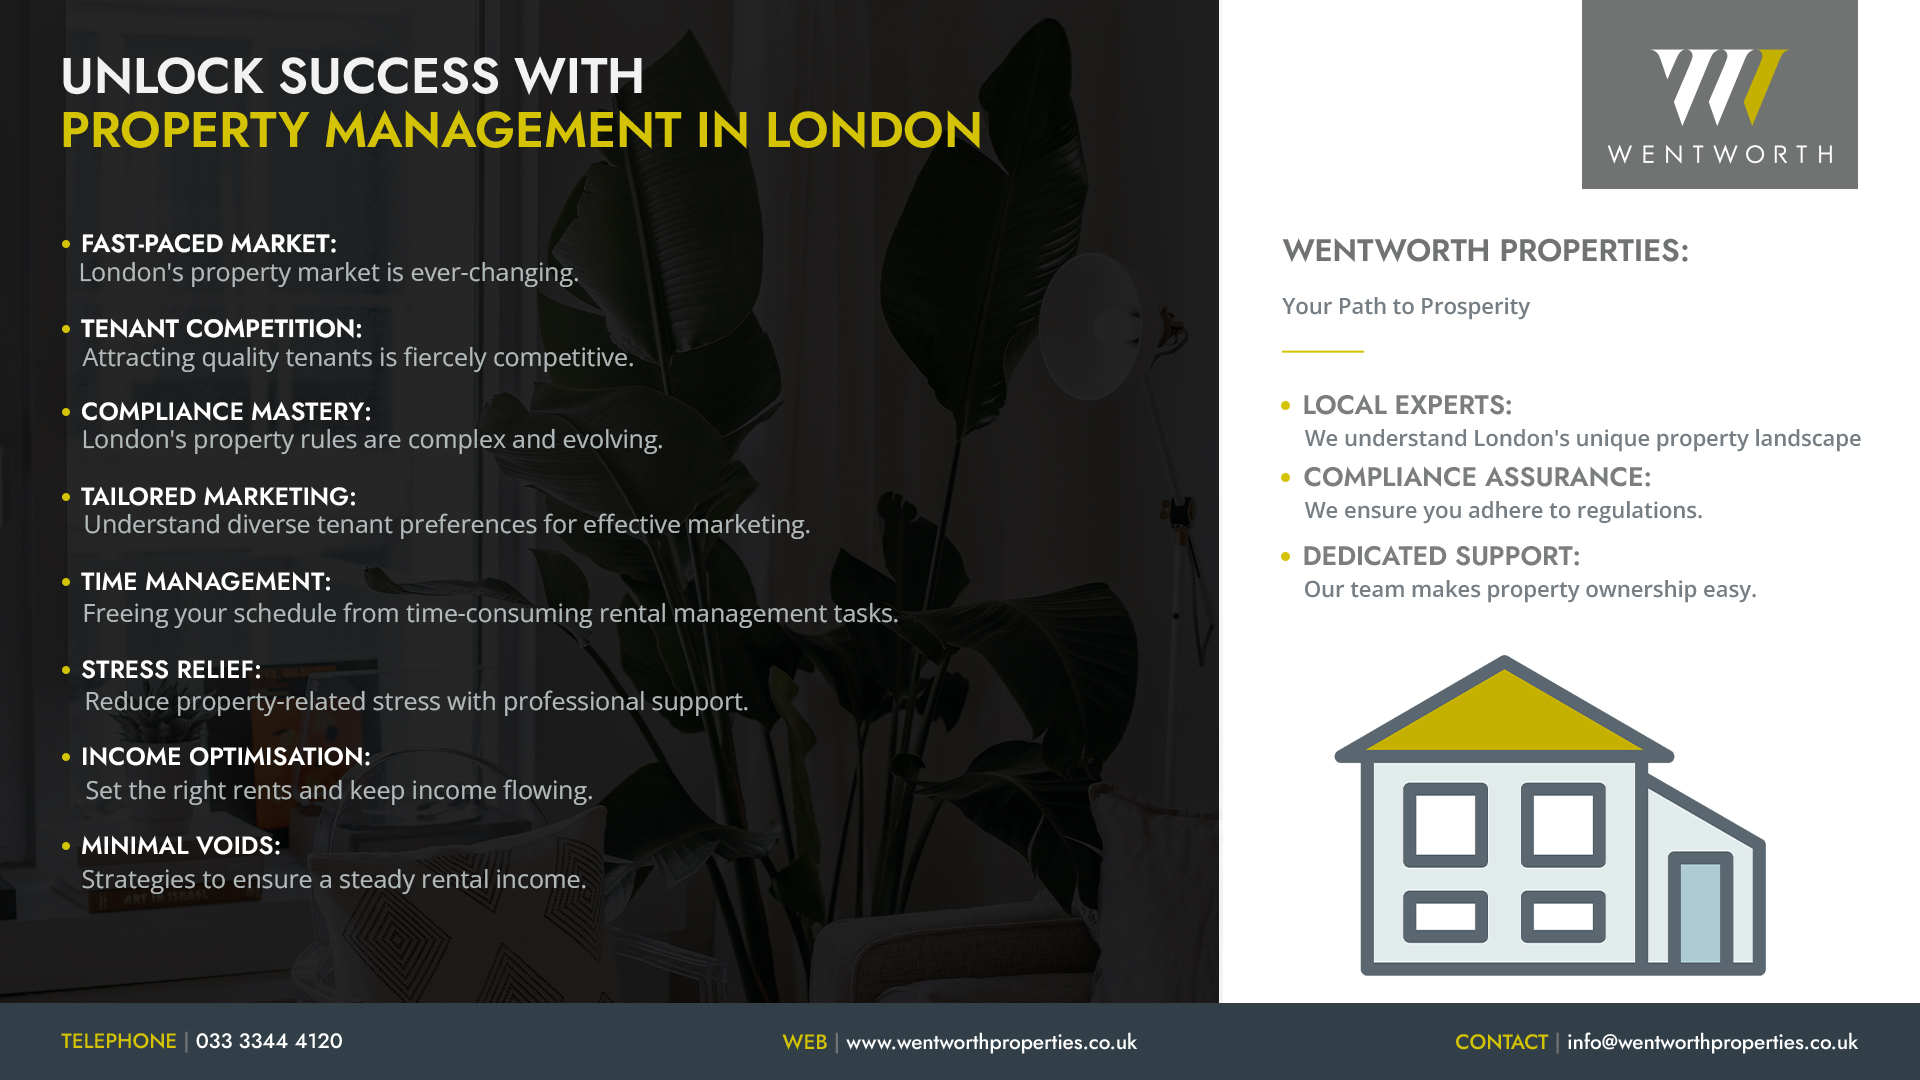 information about how to unlock success with property management in London